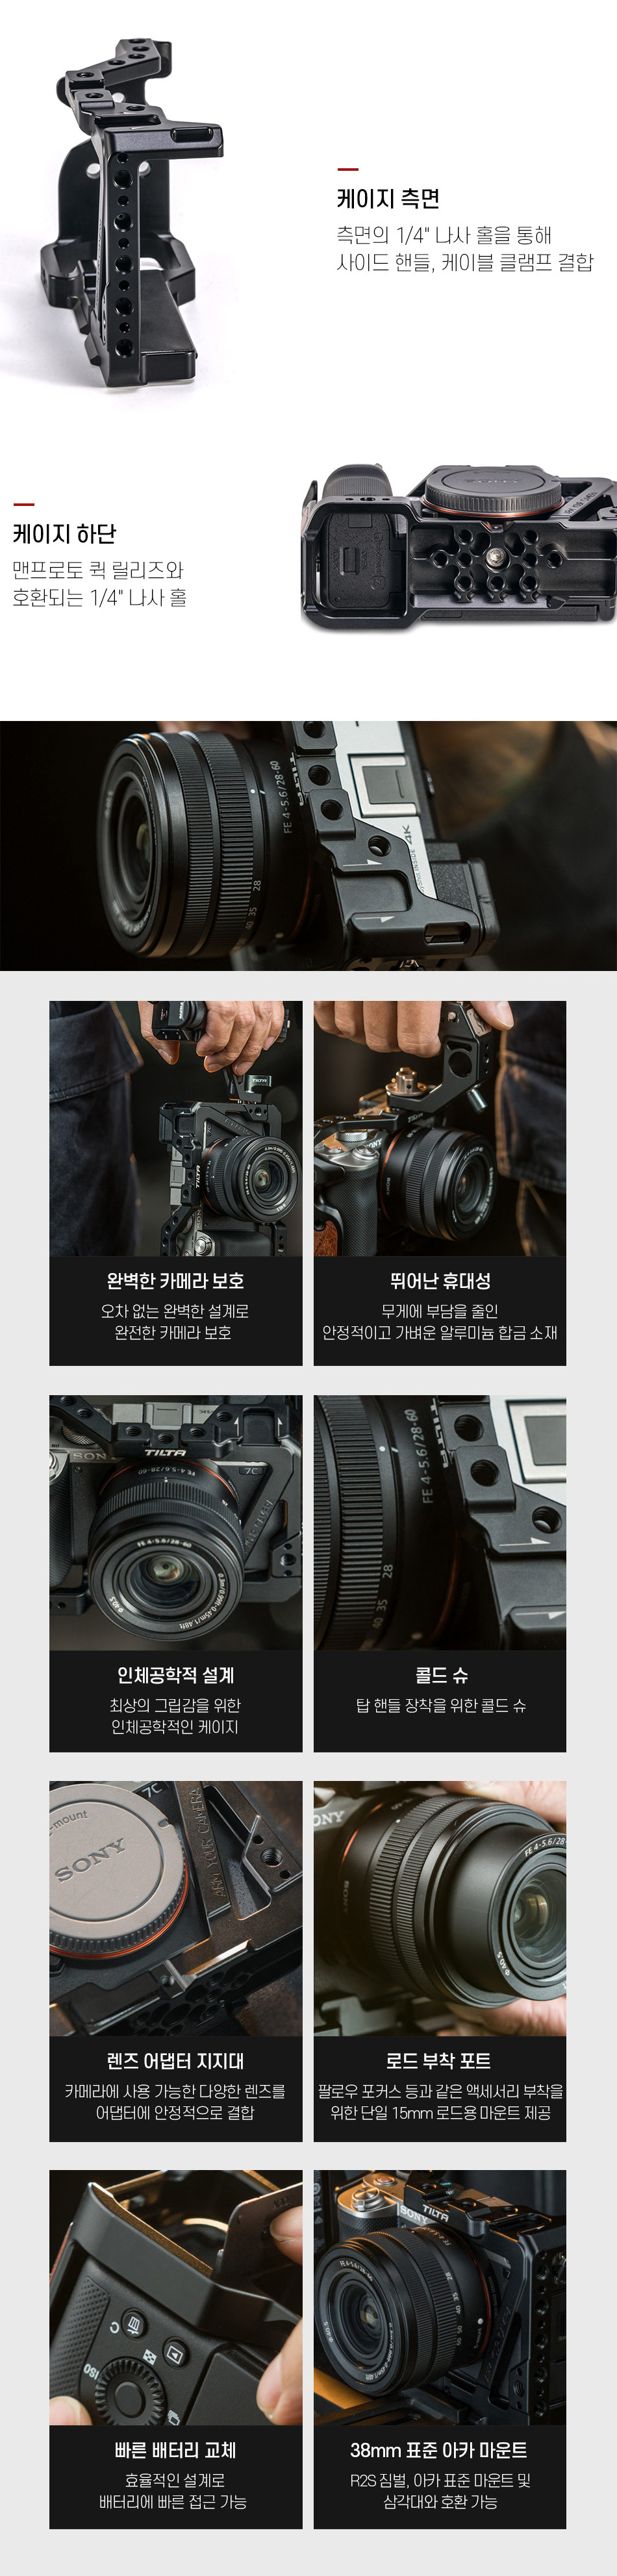 full_camera_cage_for_sony_a7c_black_02.jpg